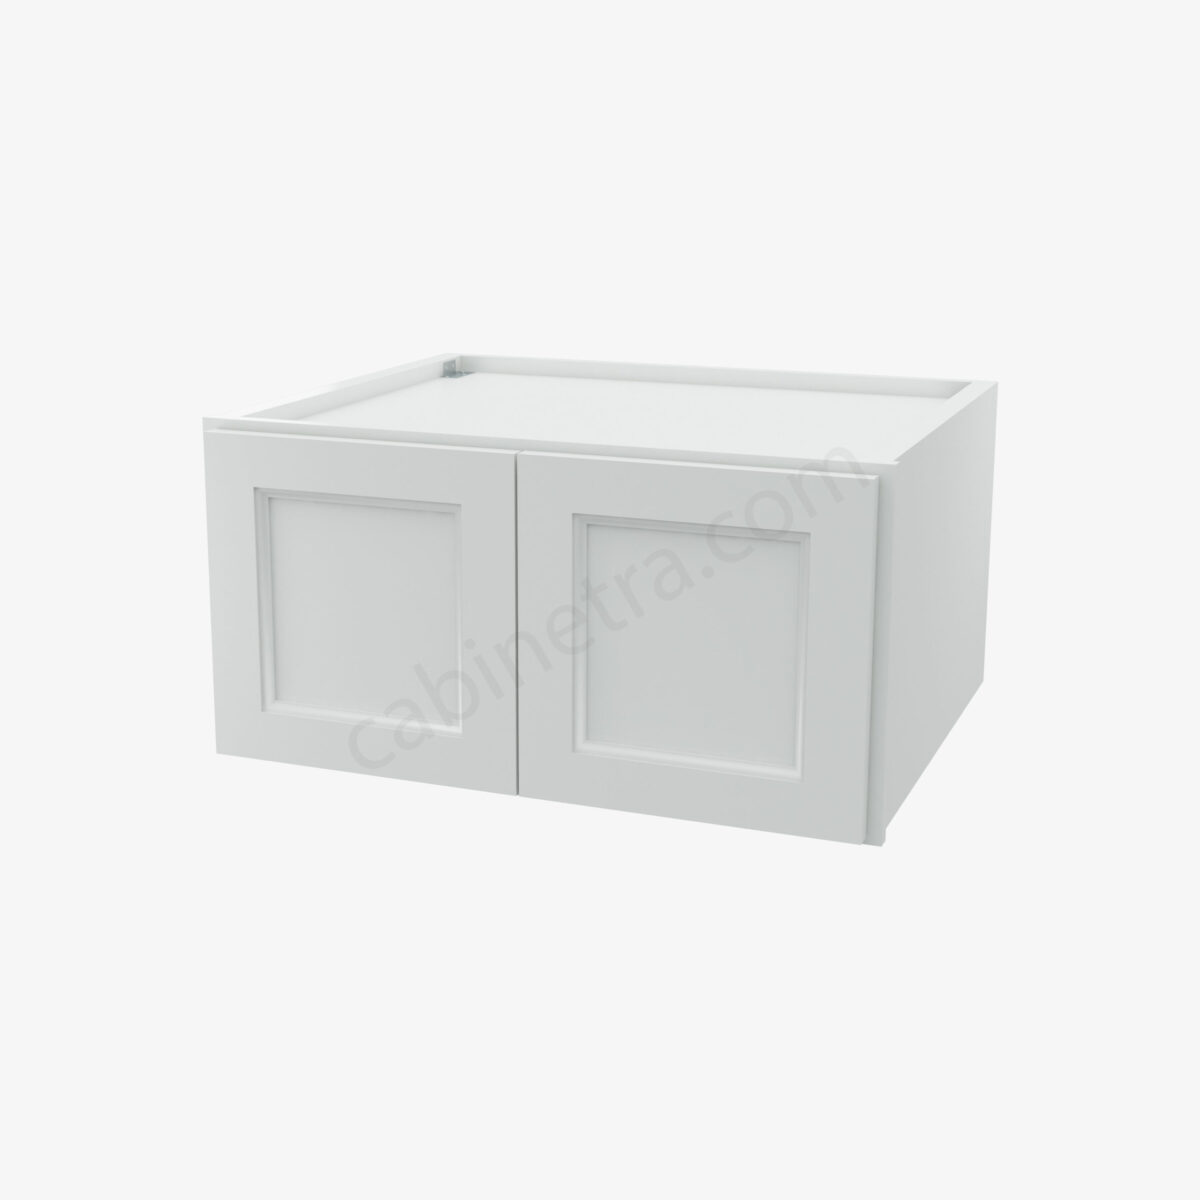 TW W301524B 0 Forevermark Uptown White Cabinetra scaled